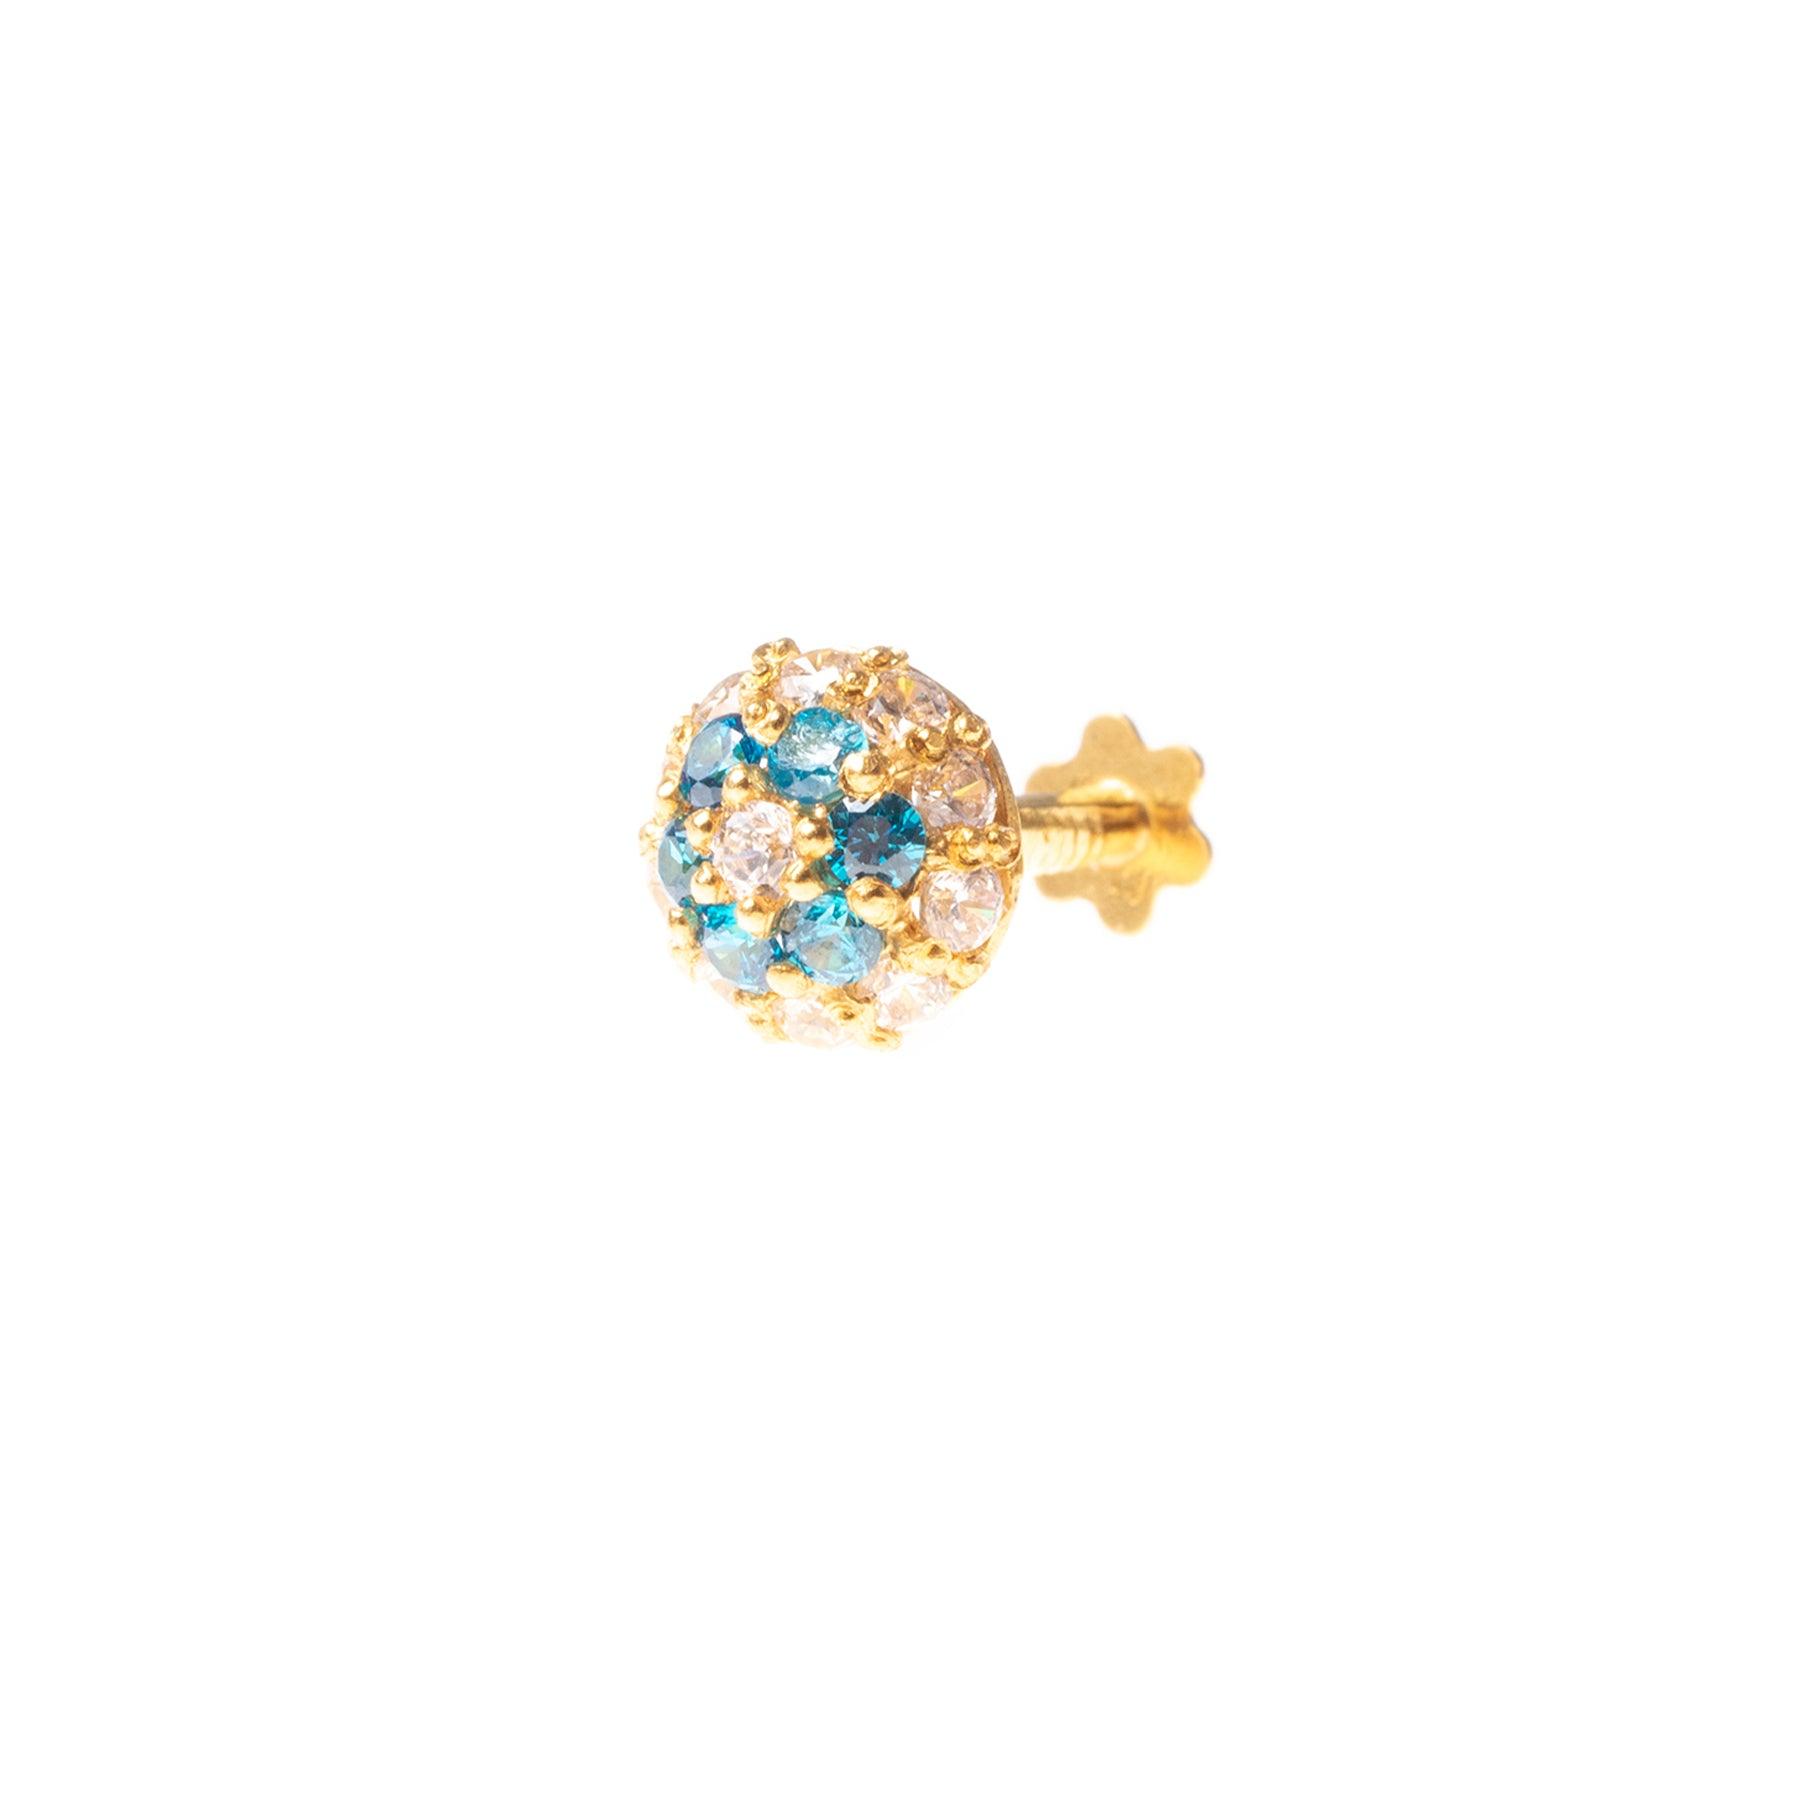 18ct Yellow Gold Nose Stud set with white and colour Cubic Zirconia Stones NIP-8-470 - Minar Jewellers